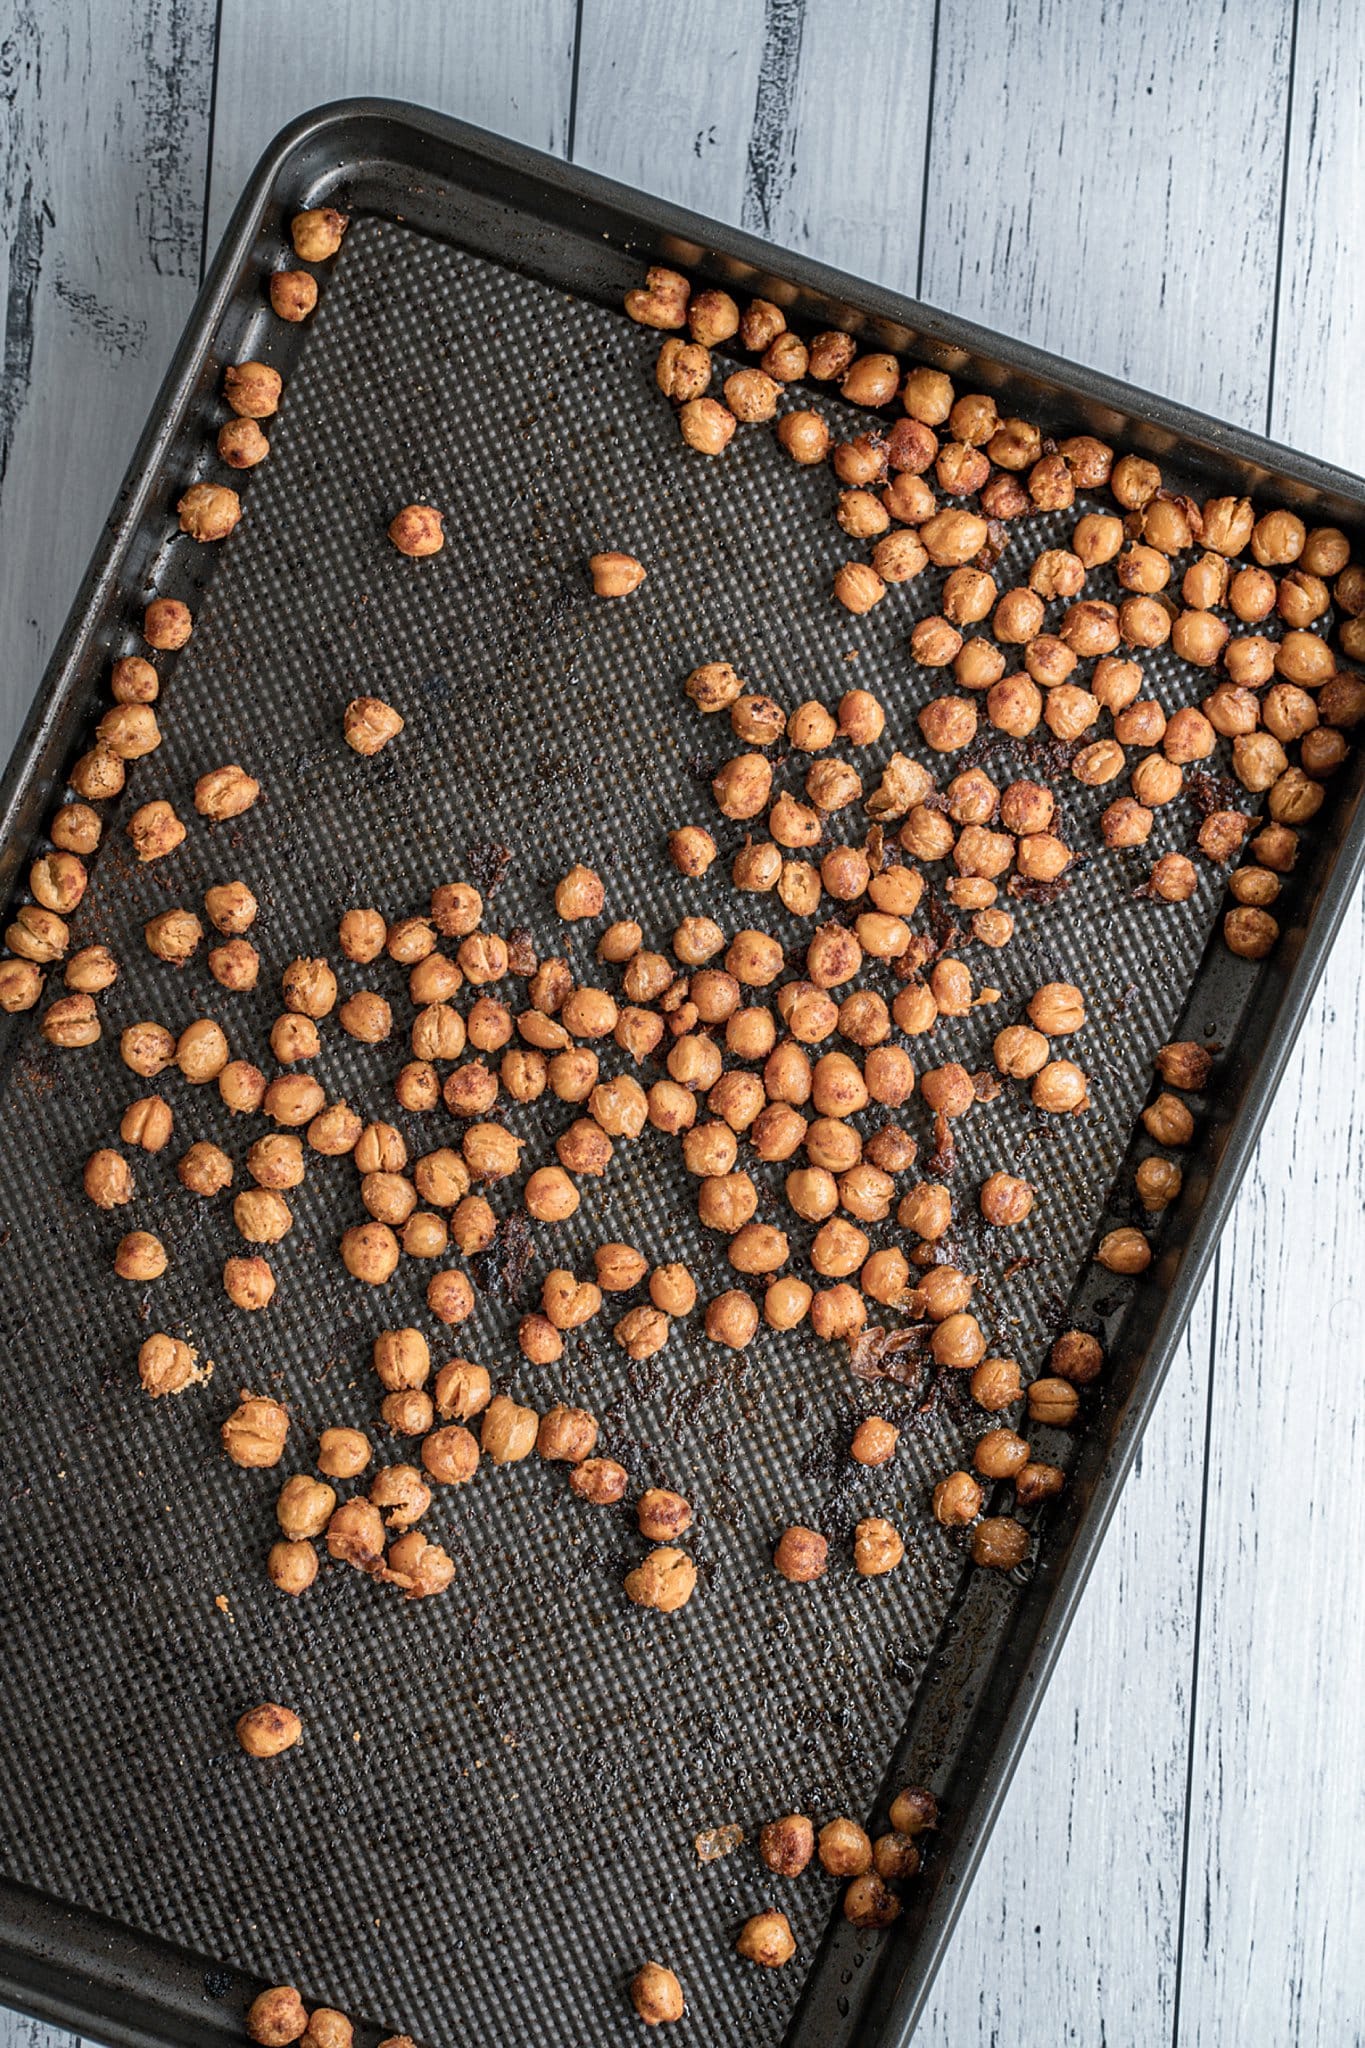 How to Know When Roasted Chickpeas Are Done